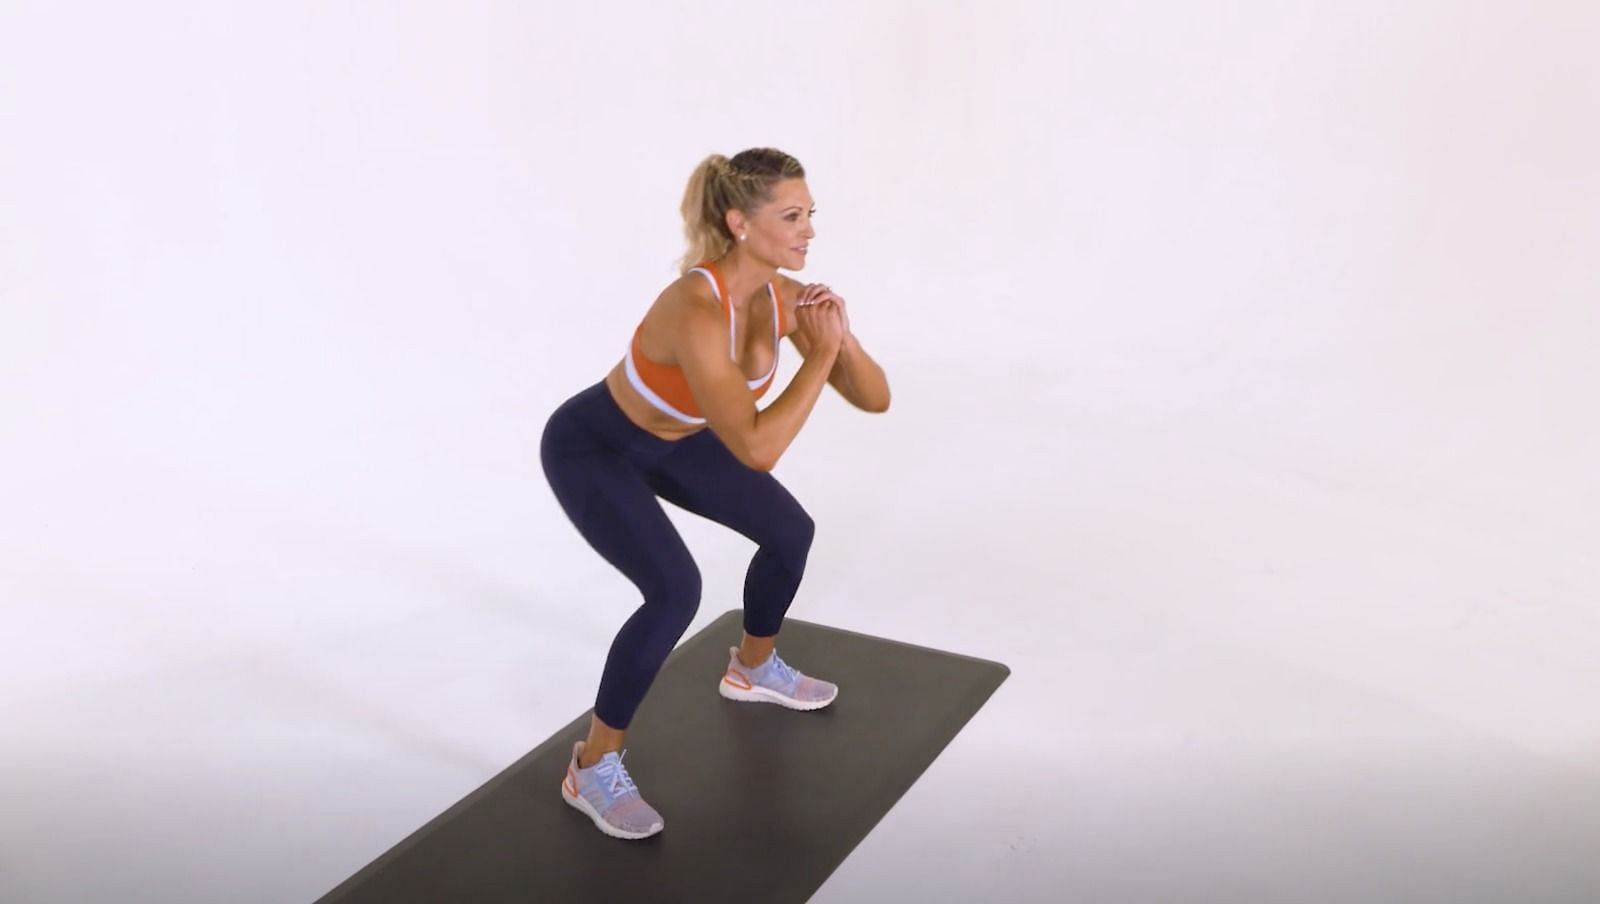 Pop squat: The explosive exercise for lower-body power and agility